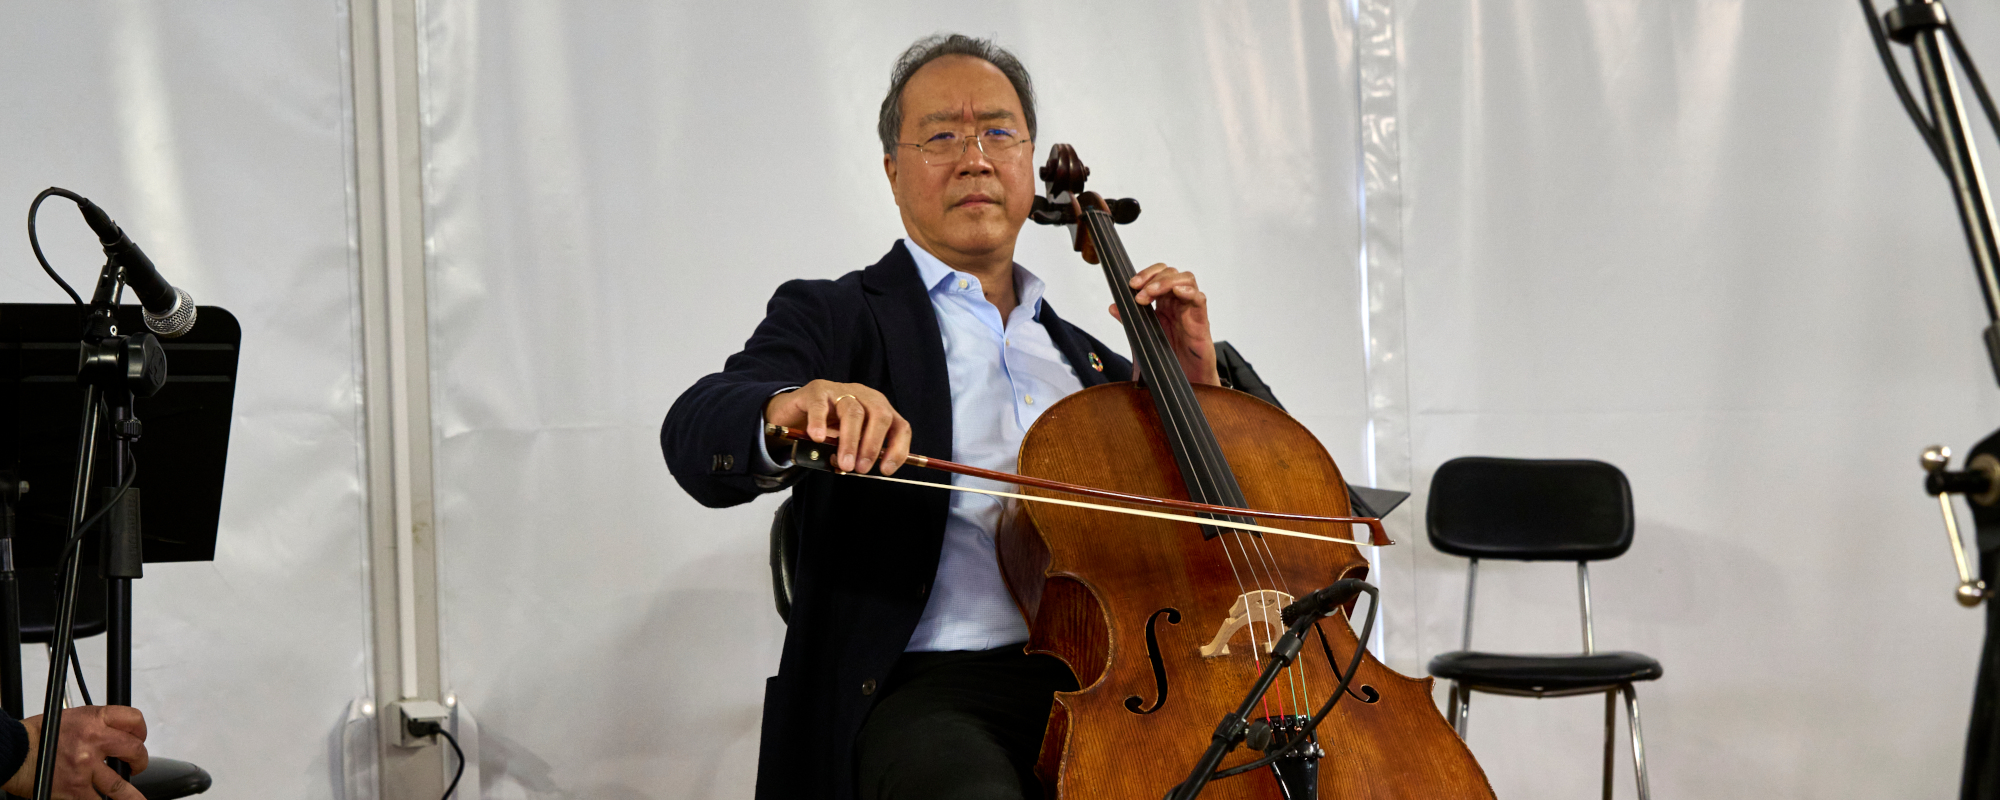 Watch: Yo-Yo Ma Performs in the Middle of the Woods with Chirping Birds